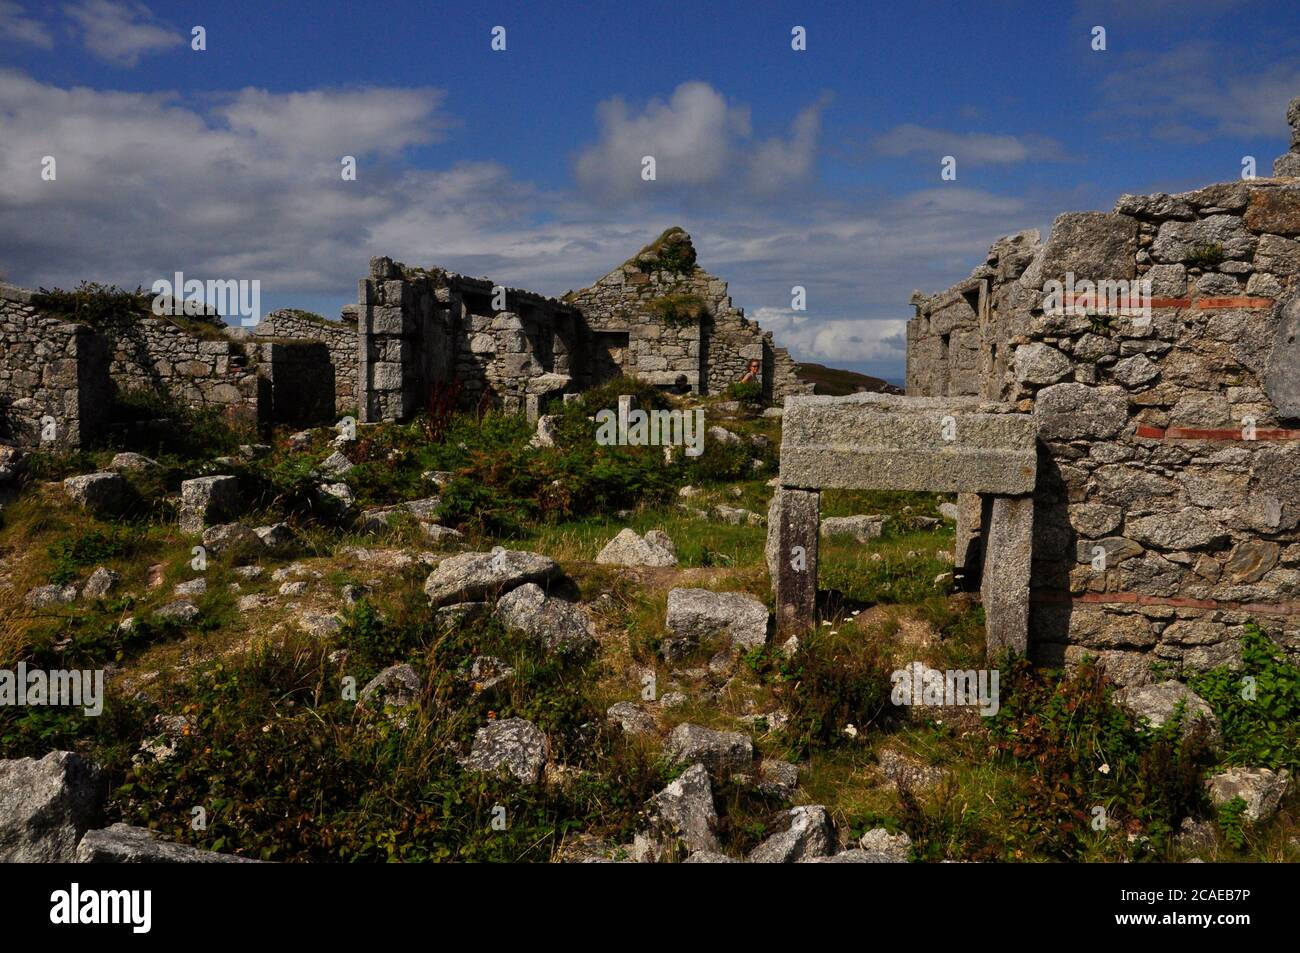 The granite ruins of the Quarterwall cottages on the island of Lundy in the Bristol channel. Devon.UK Stock Photo